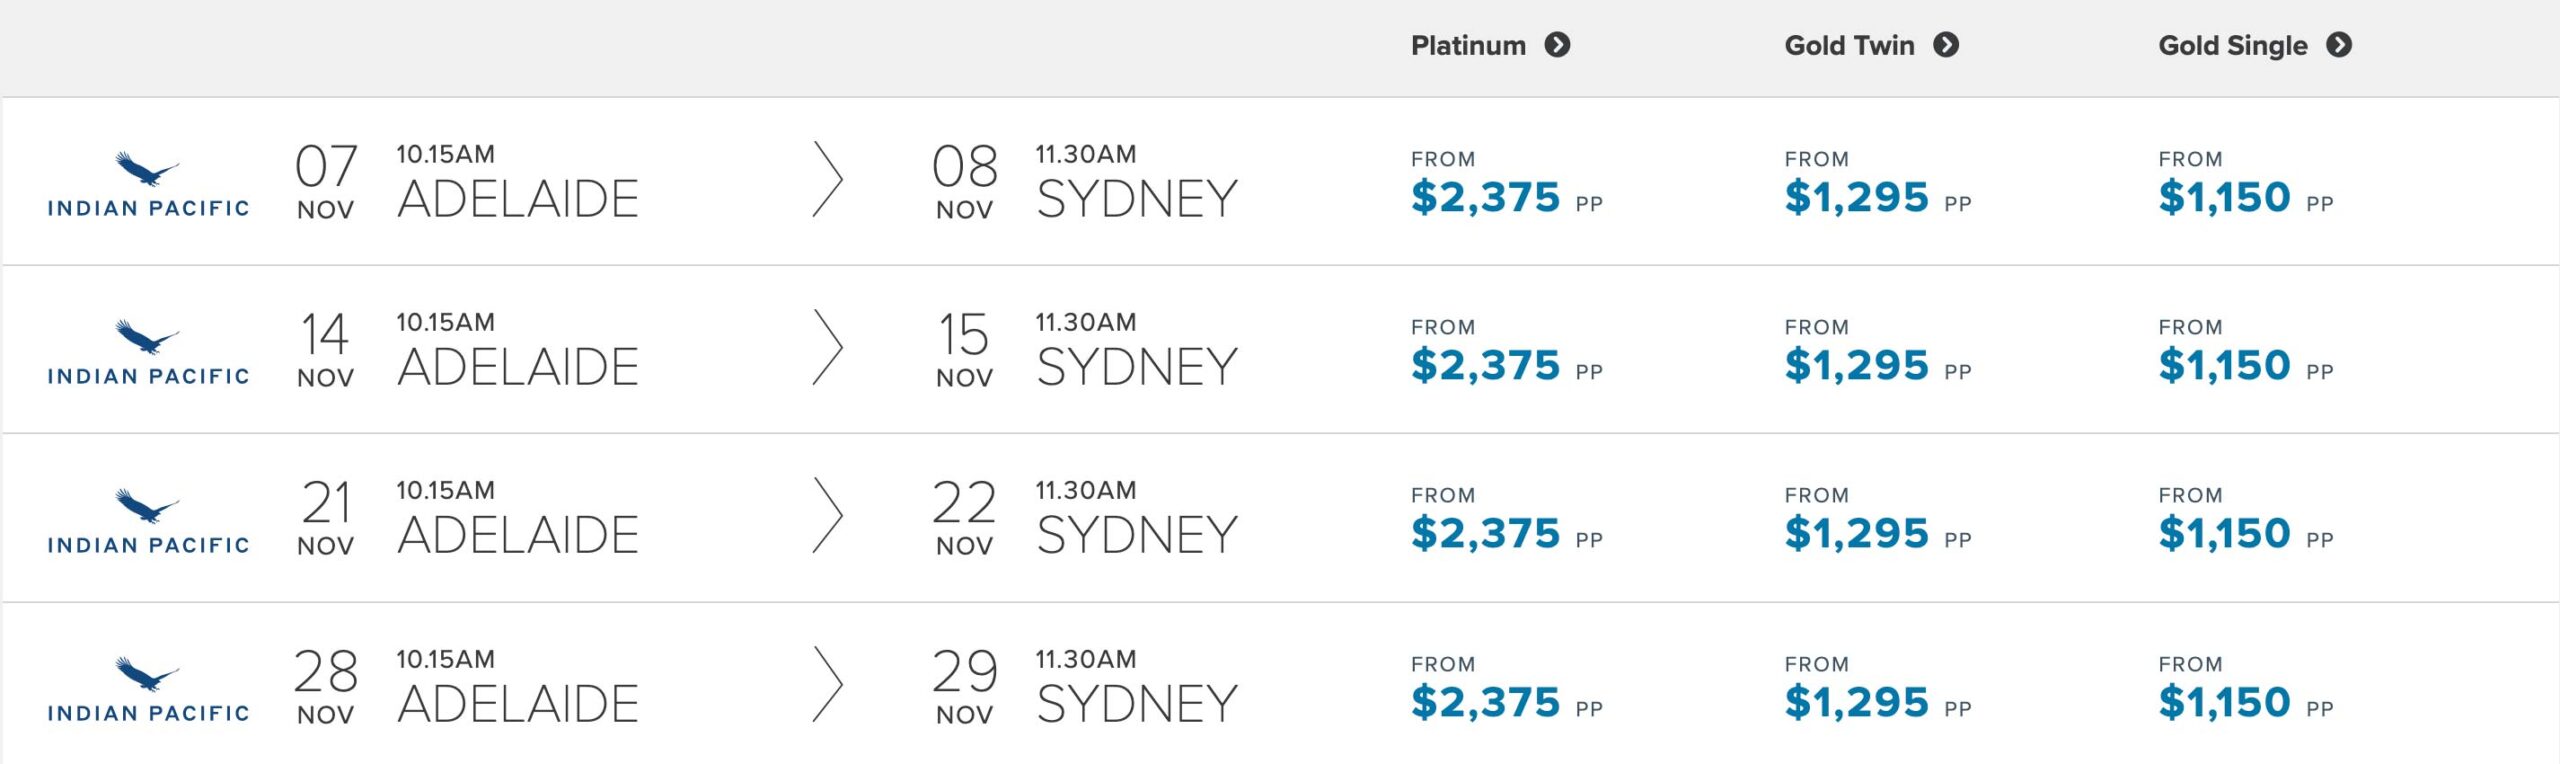 INDIAN-PACIFIC-prices-dates-Adelaide-to-Sydney-NOV-2023-